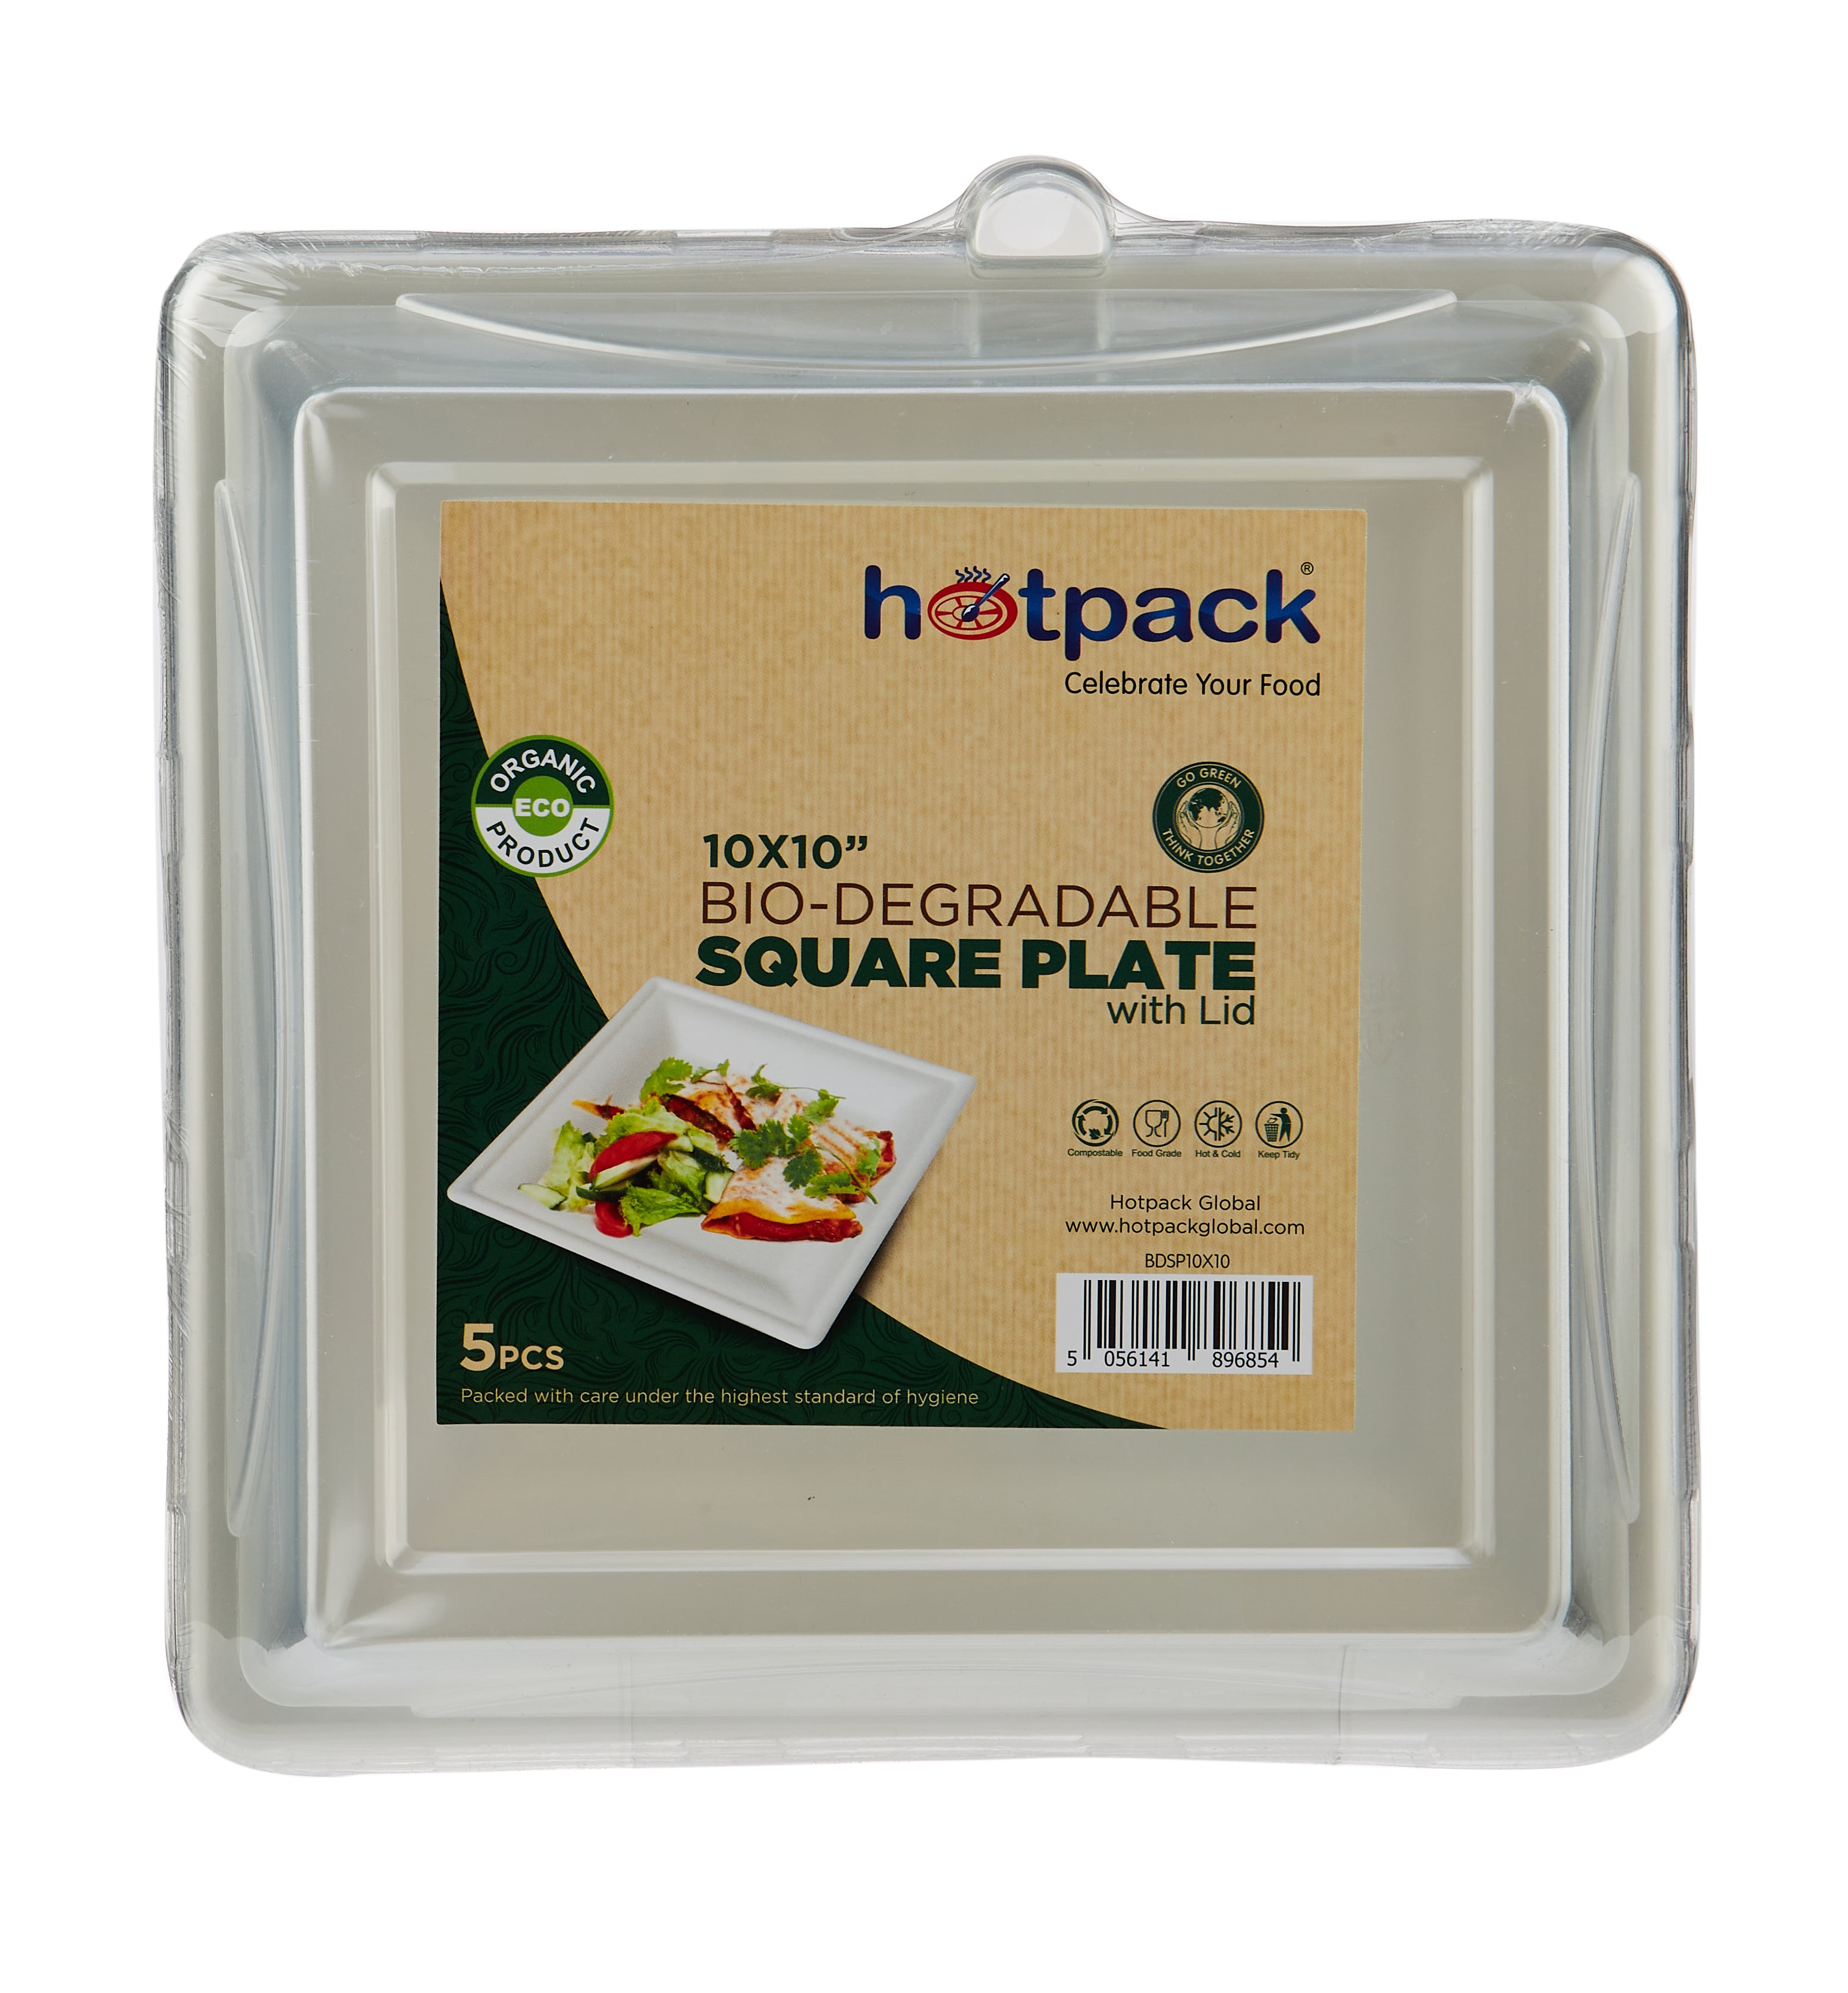 Bio-Degradable Square Plate With Lid 5 Pieces - hotpackwebstore.com